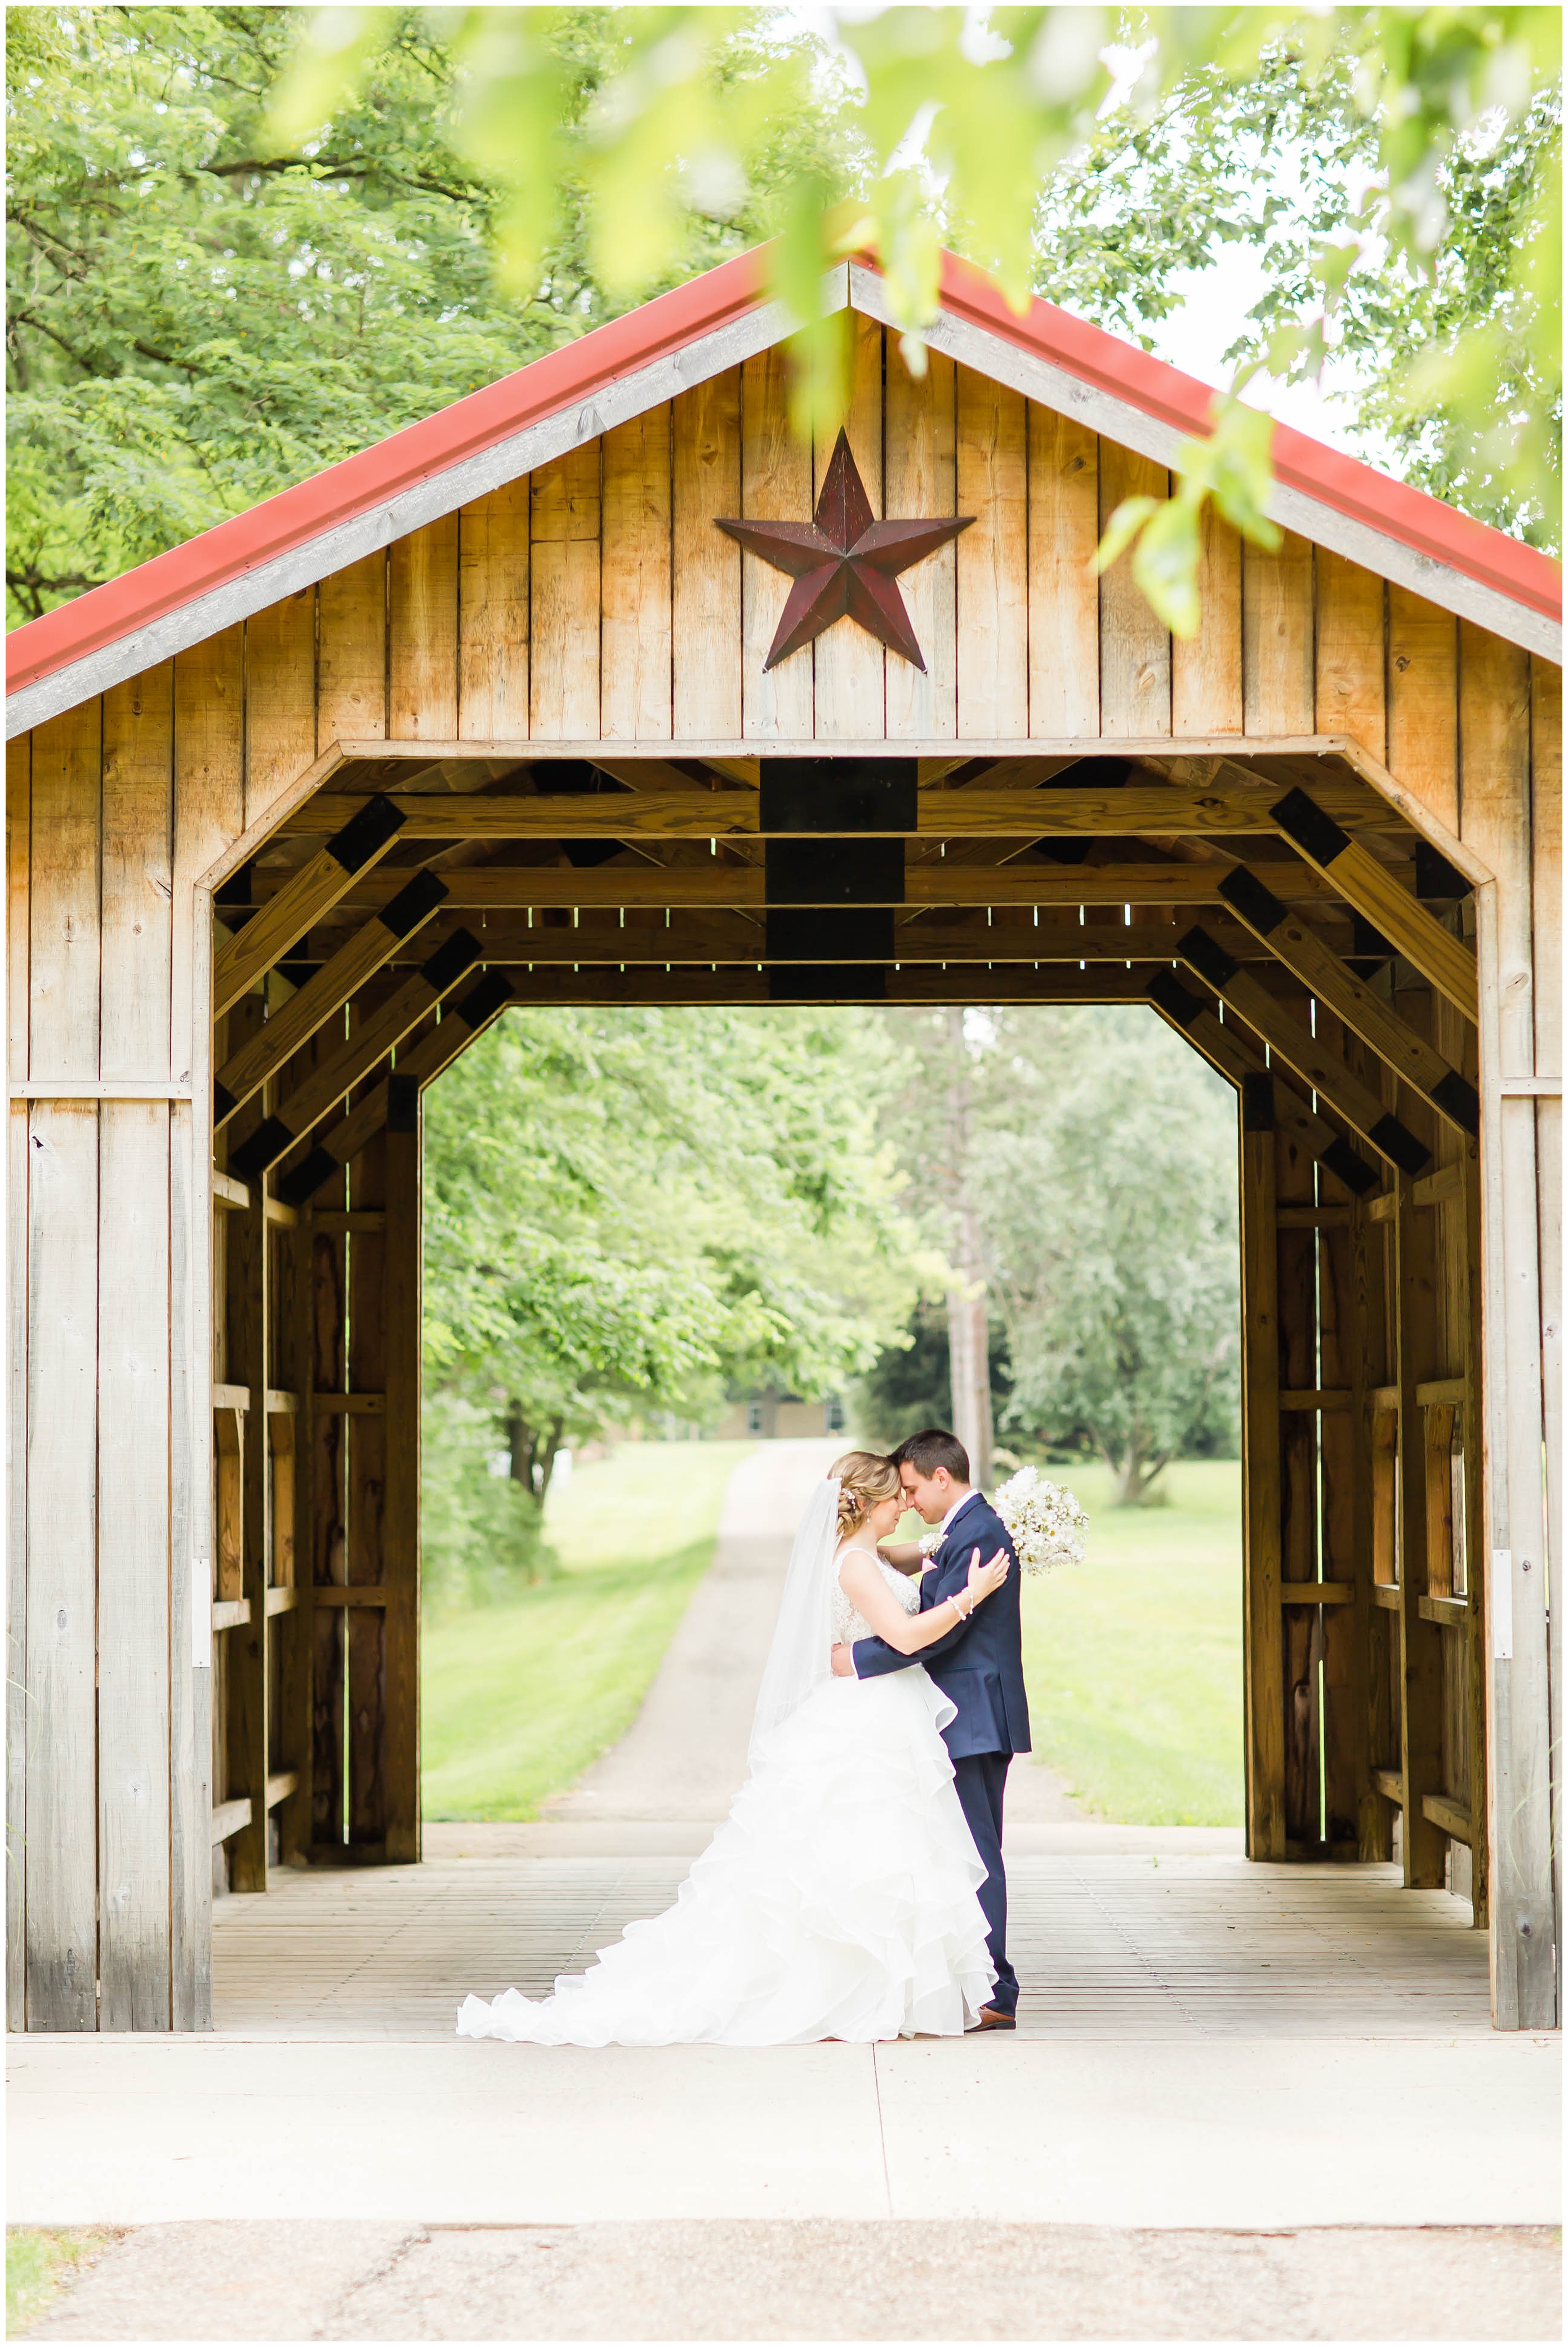 Brookside Farm Louisville Ohio,Cleveland Wedding Photographer,blush and navy blue bridal party,loren jackson photography,photographer akron ohio,rustic barn wedding,white bouquets,